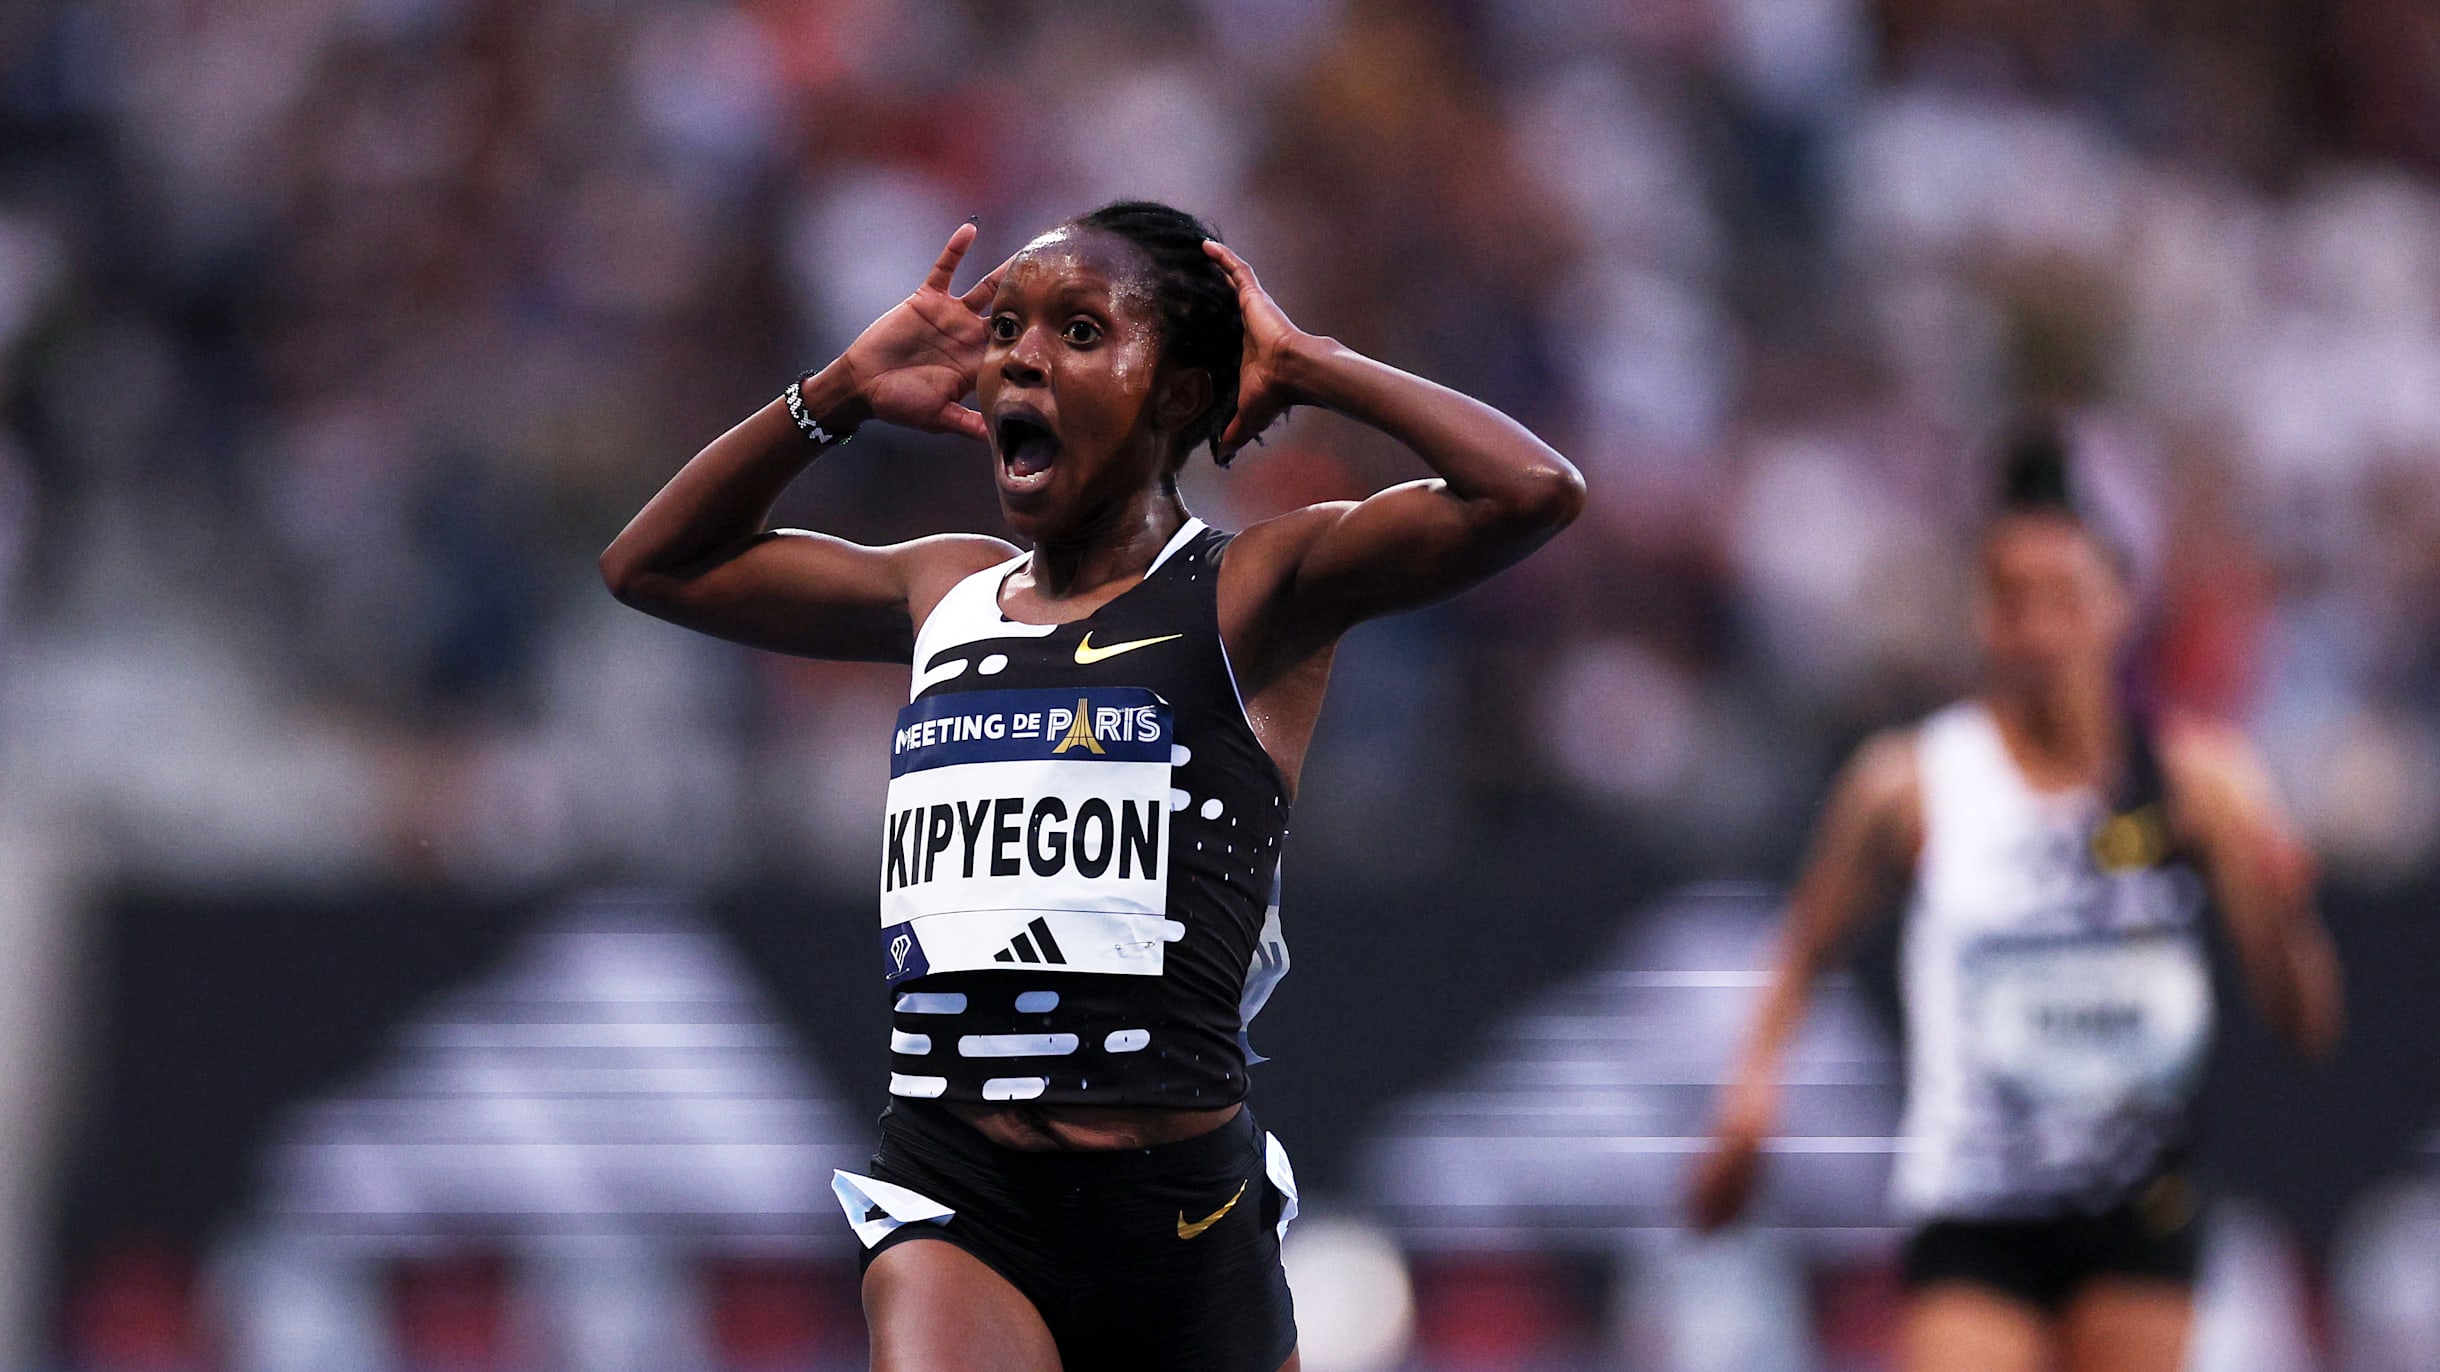 Athing Mu smashes U.S. record in women's 800m win at Prefontaine Classic